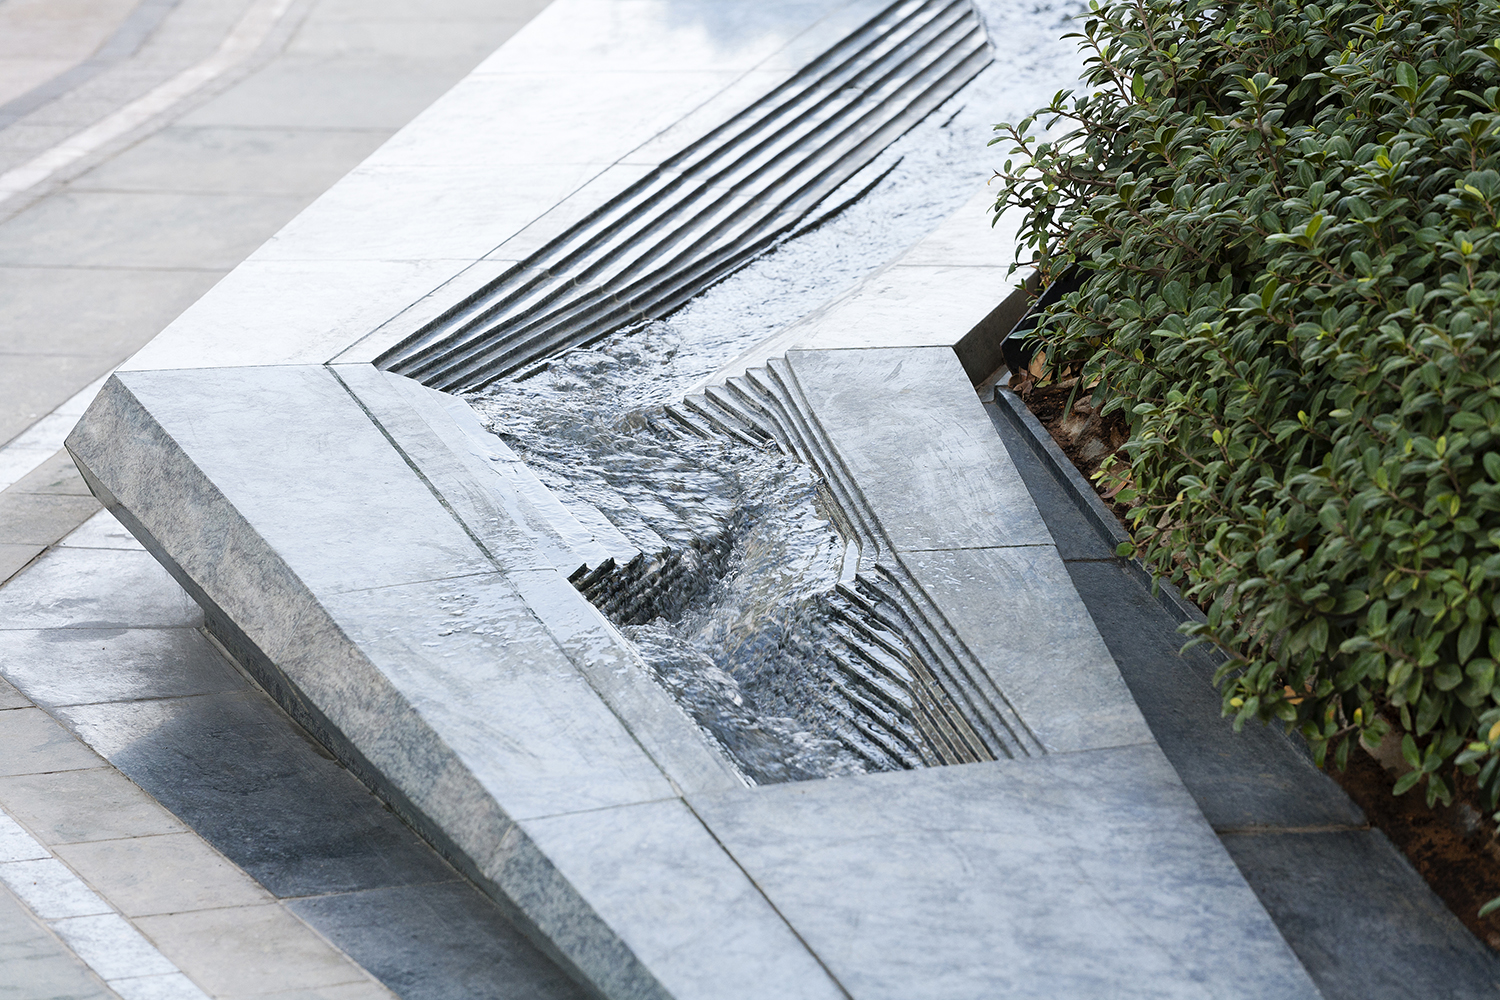 Water features are incorporated into long stone benches and the surface texture is finished with ornate grooves creating a rippling effect  